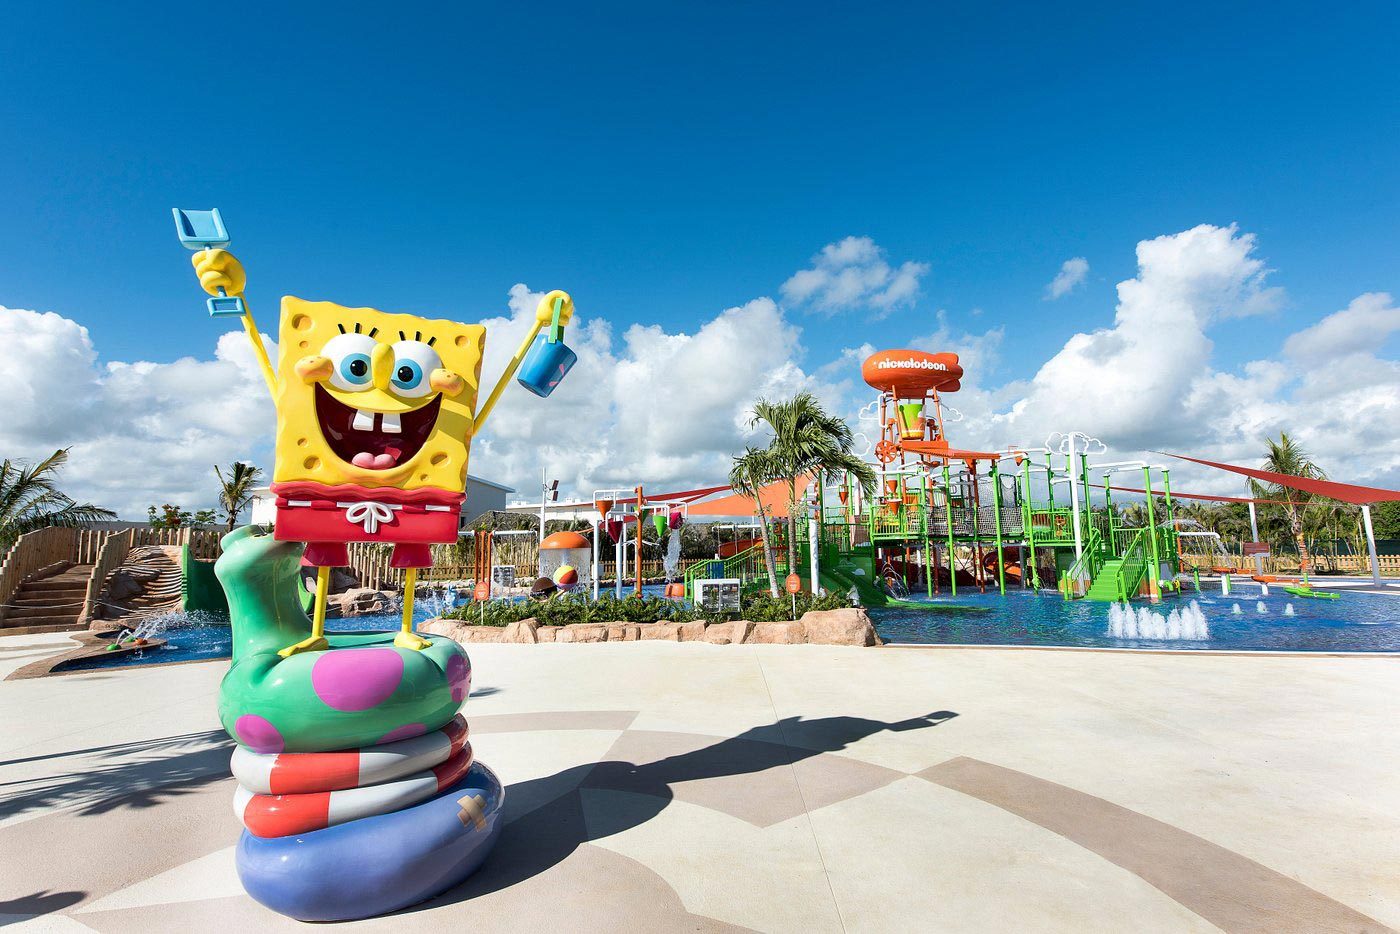 <h3>Nickelodeon Punta Cana, Dominican Republic</h3> <p>Can't get enough Nick Jr. or Nick at Nite throwbacks? The <a href="https://www.tripadvisor.com/Hotel_Review-g3200043-d9762283-Reviews-Nickelodeon_Hotels_Resorts_Punta_Cana-Uvero_Alto_Punta_Cana_La_Altagracia_Province_Do.html" rel="noopener">Nickelodeon hotel in Punta Cana</a> is a fully immersive experience into the world of Nickelodeon, and the whole cast of characters is present and accounted for. The crew from <em>PAW Patrol</em>, <em>Dora the Explorer</em>, <em>Teenage Mutant Ninja Turtles</em>, <em>Fairly OddParents</em>, <em>SpongeBob SquarePants</em> and all of their friends pop up daily, and scheduled "slime" dumps at the water park—for which admission is also included—are all part of any trip here. The rooms are also decorated with the channel's style in mind, including splashes of that signature orange, but given the polish of <a href="https://www.rd.com/list/worlds-most-outrageous-luxury-hotels-and-resorts/" rel="noopener noreferrer">contemporary luxury</a>.</p> <p>Novelty restaurants in the nine-restaurant Gourmet Village range from space-inspired dining to a gorgeous marketplace with cooking stations, proving that wanting a kid-at-heart, playful experience doesn't have to come at the expense of grown-up taste.</p> <p><strong>Pros:</strong></p> <ul> <li>Nickelodeon theme including kids' favorite characters</li> <li>No additional cost for character encounters</li> <li>Certified Autism Center since 2018</li> <li>Plentiful amenities for families with kids of all ages</li> </ul> <p><strong>Cons:</strong></p> <ul> <li>Smaller rooms for the money</li> <li>Need to walk to the water park</li> </ul> <p class="listicle-page__cta-button-shop"><a class="shop-btn" href="https://www.tripadvisor.com/Hotel_Review-g3200043-d9762283-Reviews-Nickelodeon_Hotels_Resorts_Punta_Cana-Uvero_Alto_Punta_Cana_La_Altagracia_Province_Do.html">Book Now</a></p>